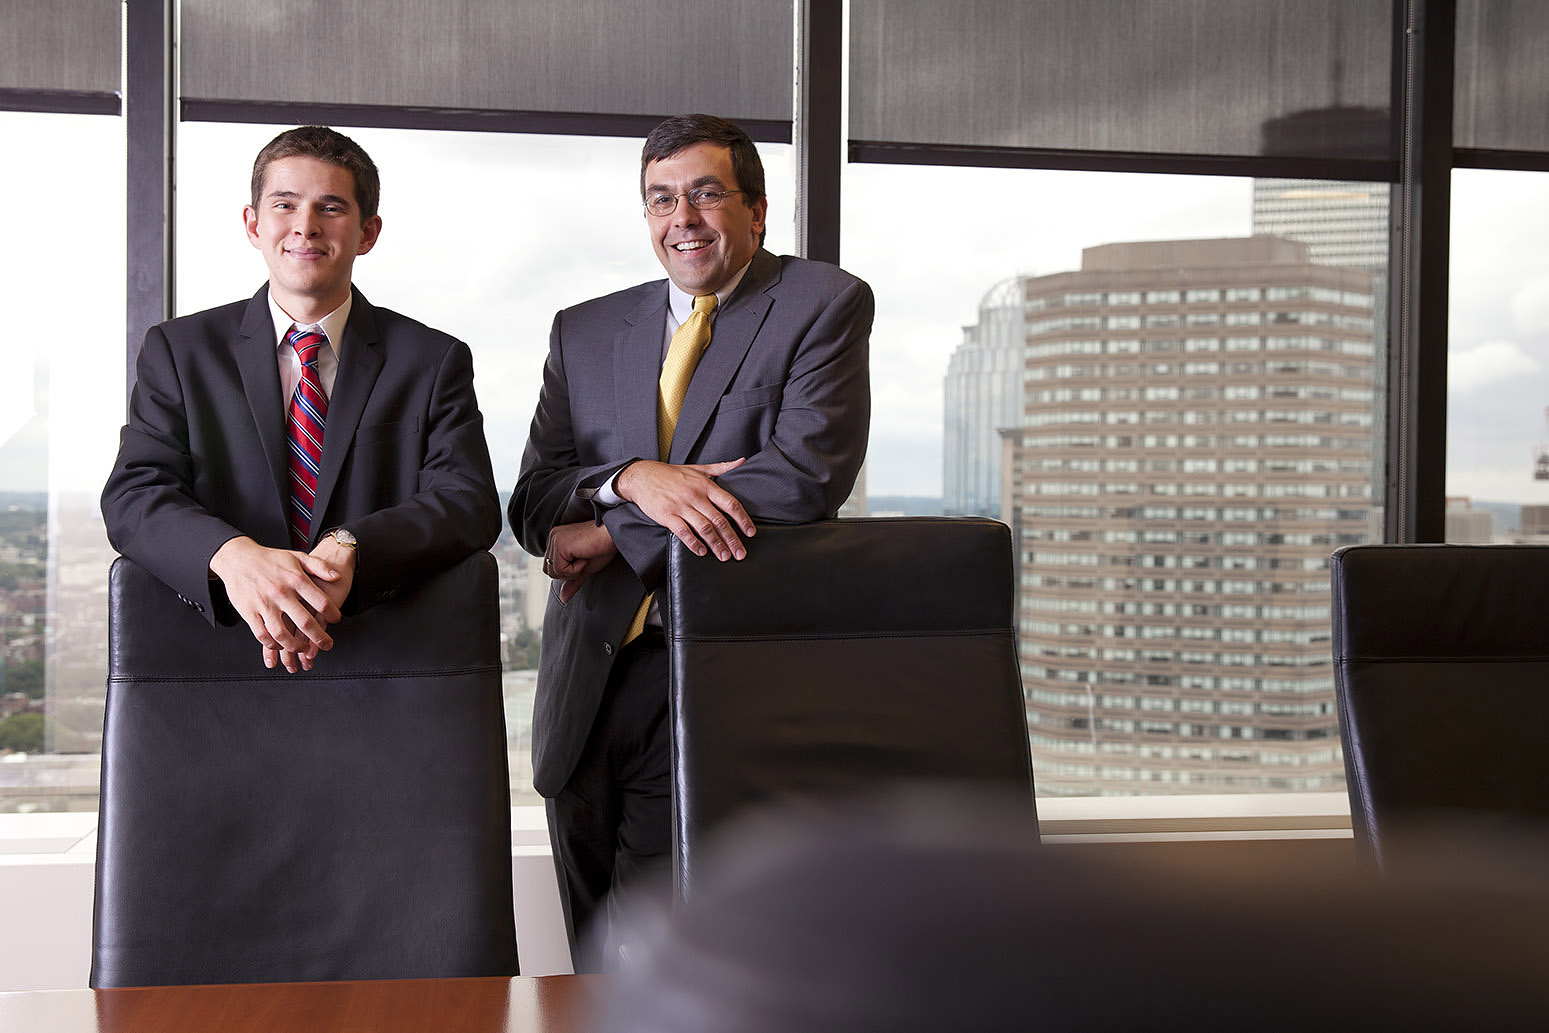 Ladd intern Zach Polich '15 and TM Capital managing director Brad Adams '92 pose at TM headquarters in Boston, located on the 25th floor of Hancock Place. (Phyllis Graber Jensen/Bates College)